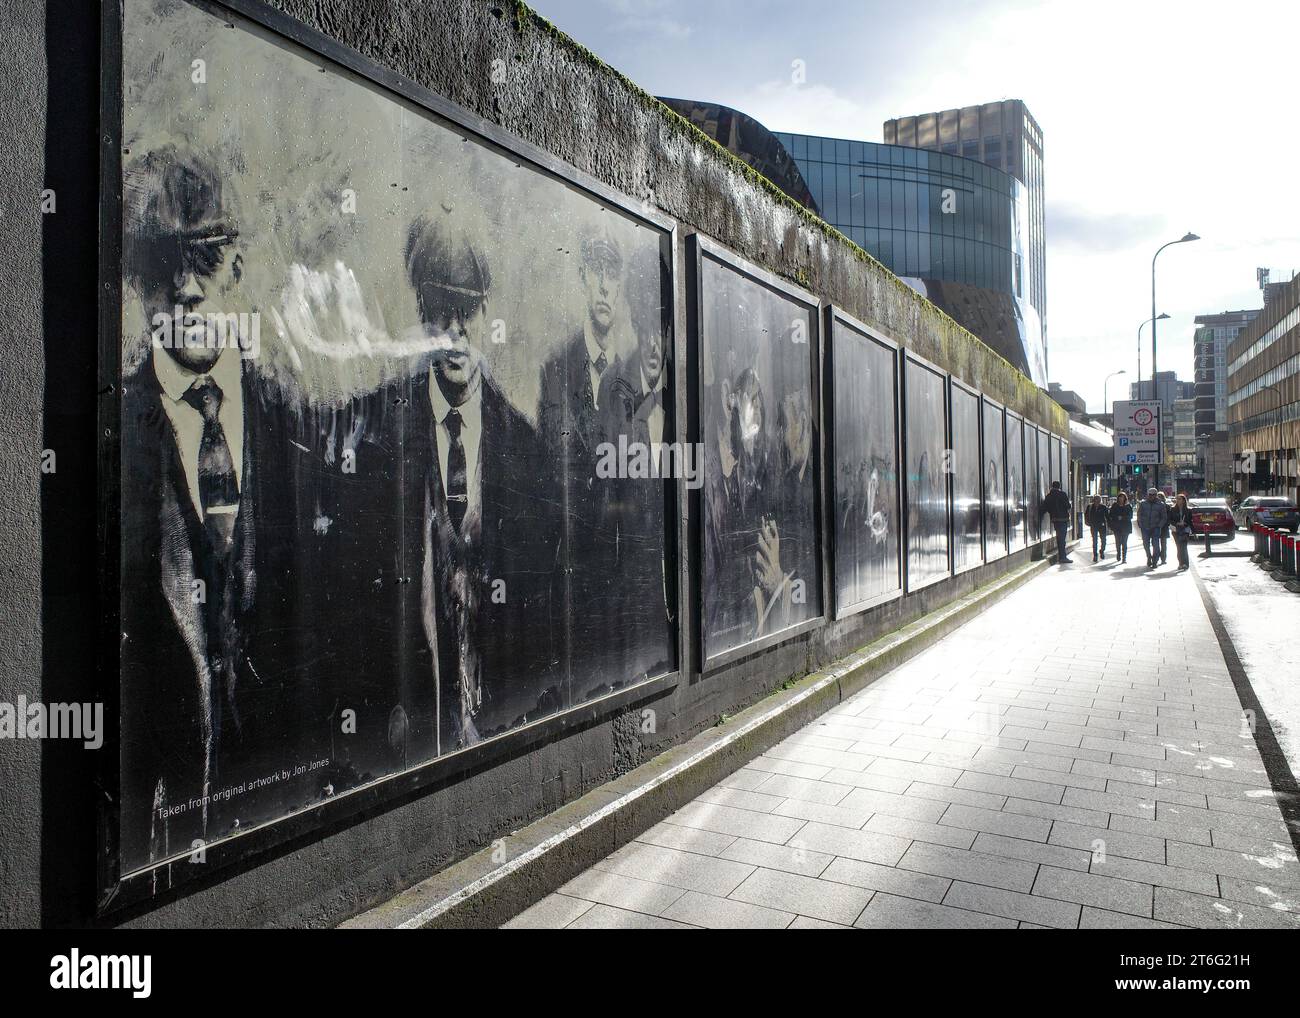 Birmingham, UK - Nov 5, 2023: 'Made In Birmingham' mural outside New Street Station featuring characters from the Peaky Blinders television series Stock Photo